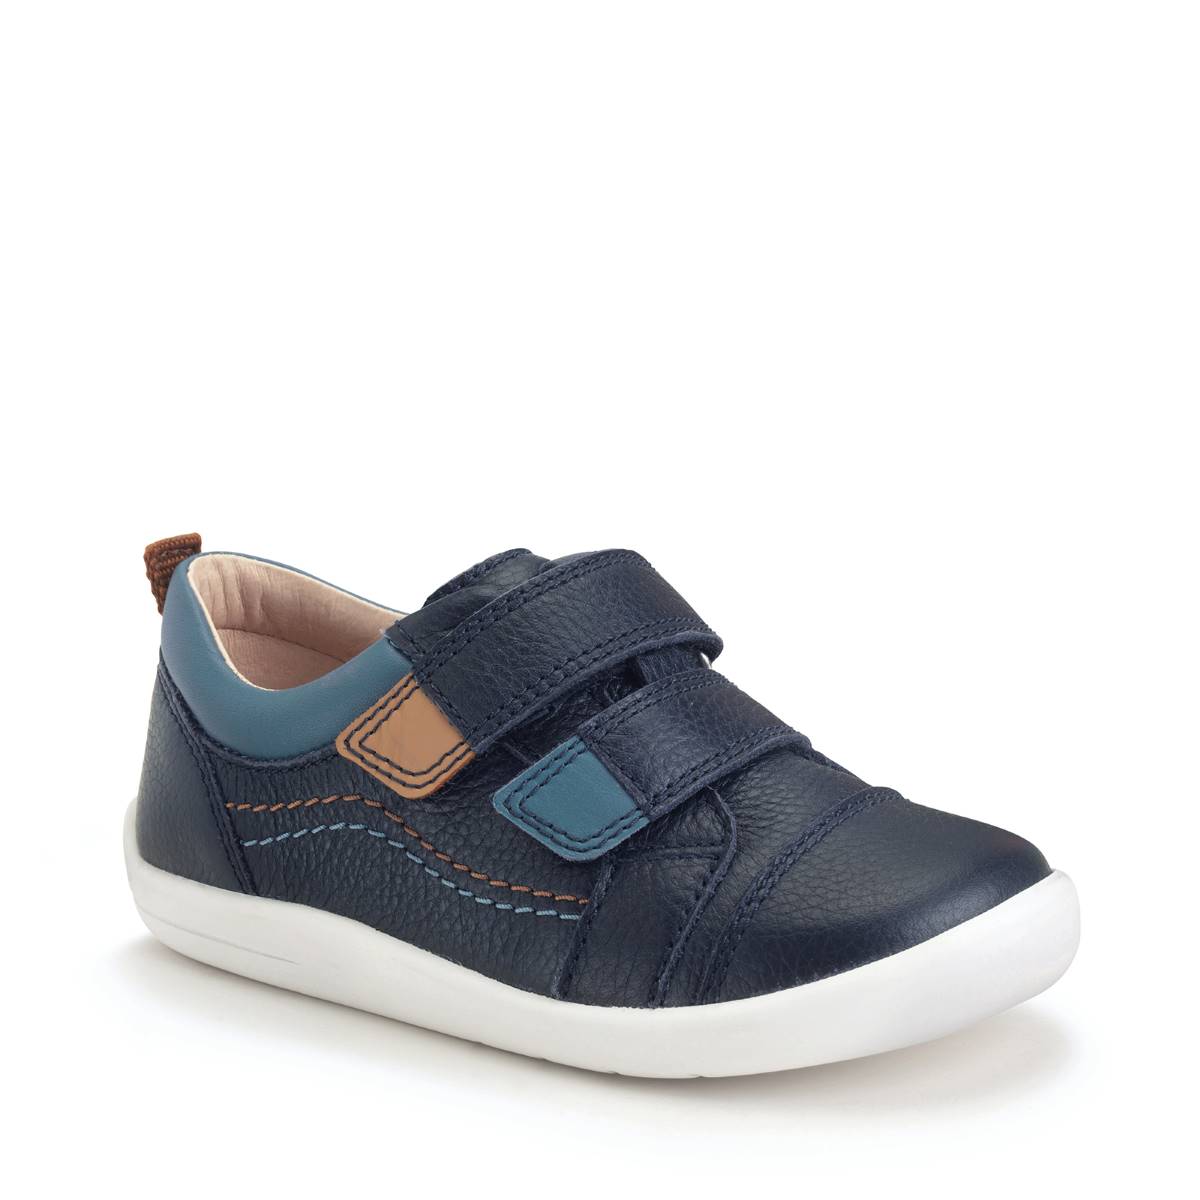 Start Rite Playhouse Clubhouse Navy leather Kids Boys Toddler Shoes 0826-97G in a Plain Leather in Size 8